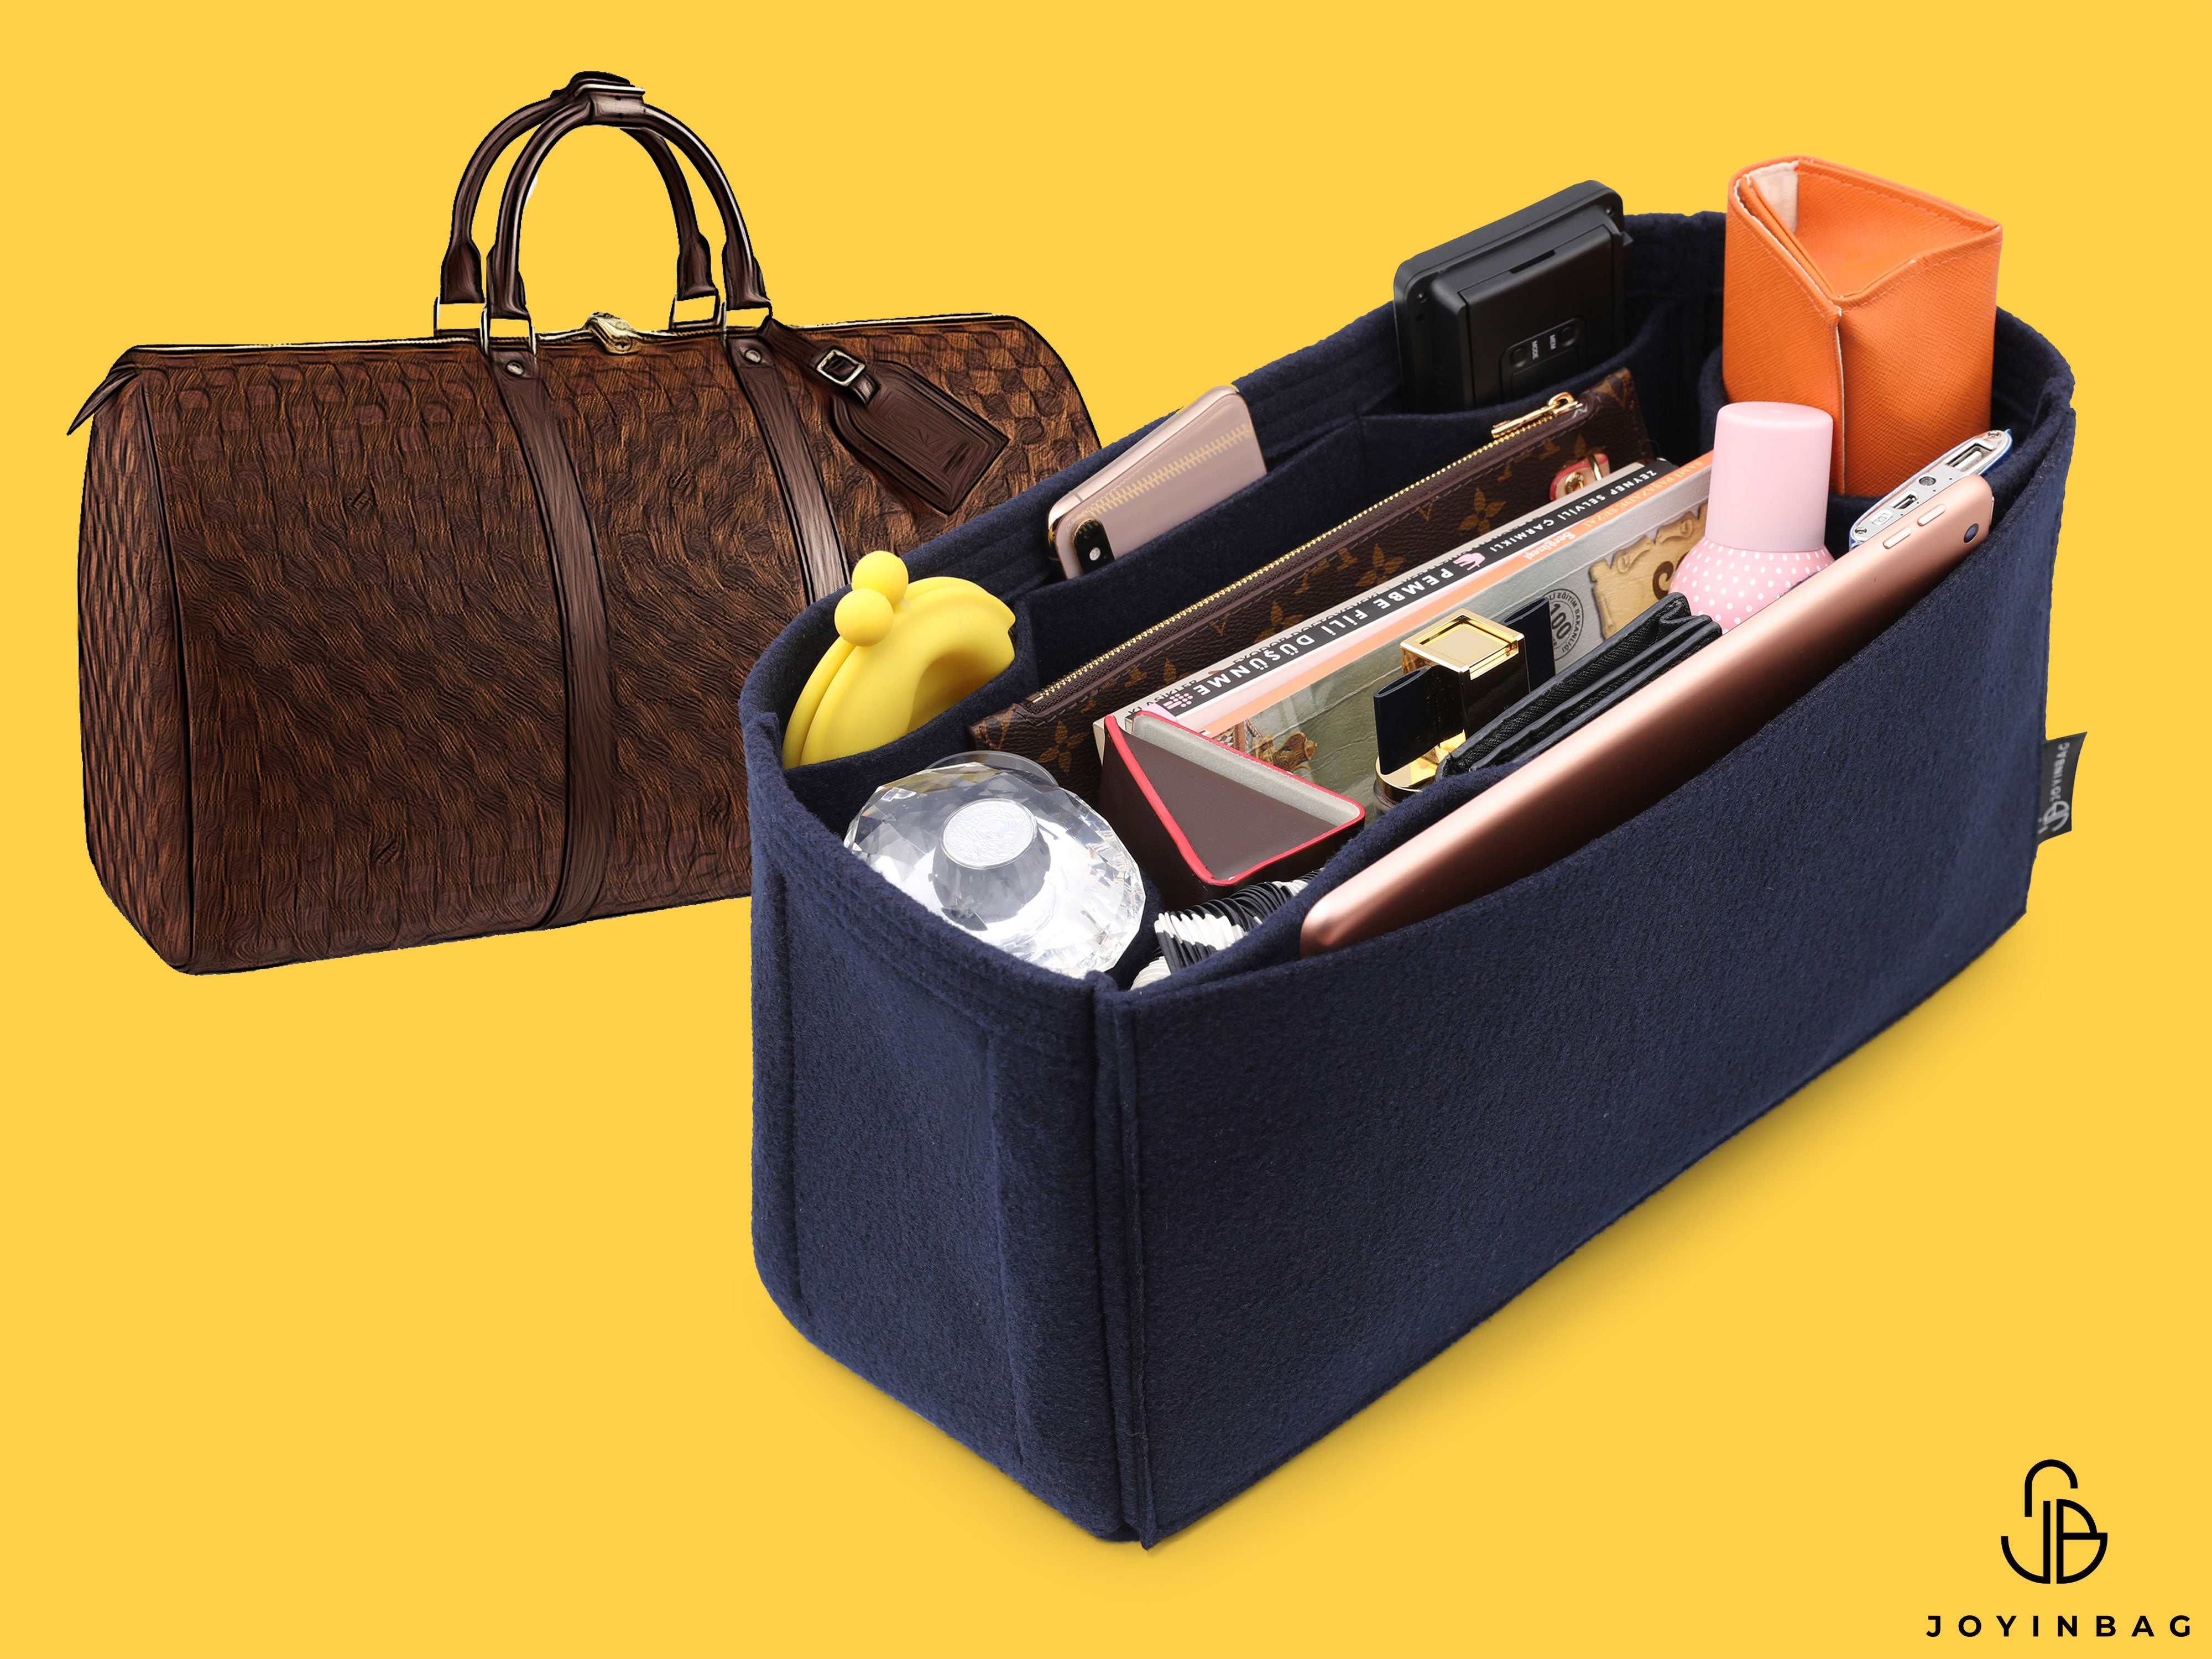 Louis Vuitton Graceful Organizer Insert, Bag Organizer with Laptop  Compartment and Pen Holder